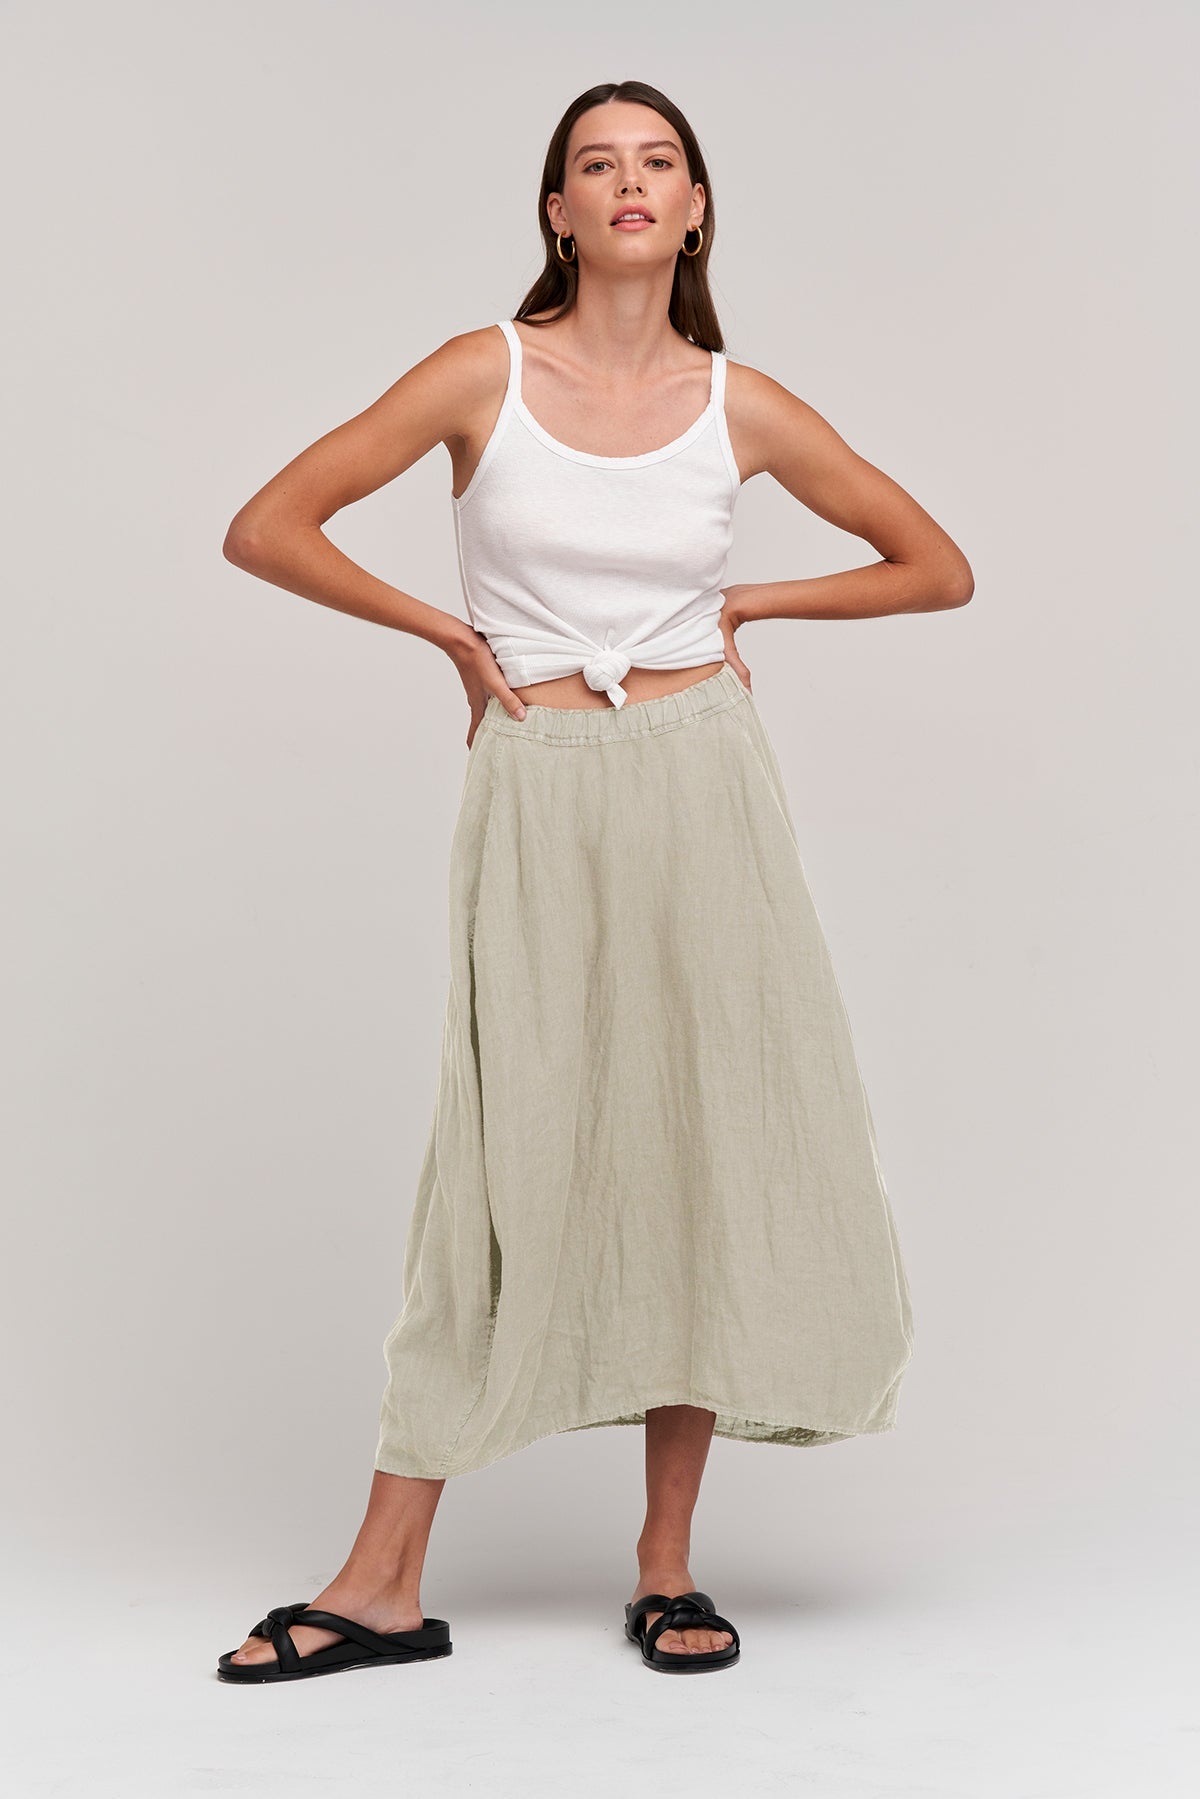 The model is wearing a white tank top and a Velvet by Graham & Spencer FAE LINEN A-LINE SKIRT.-35954052104385